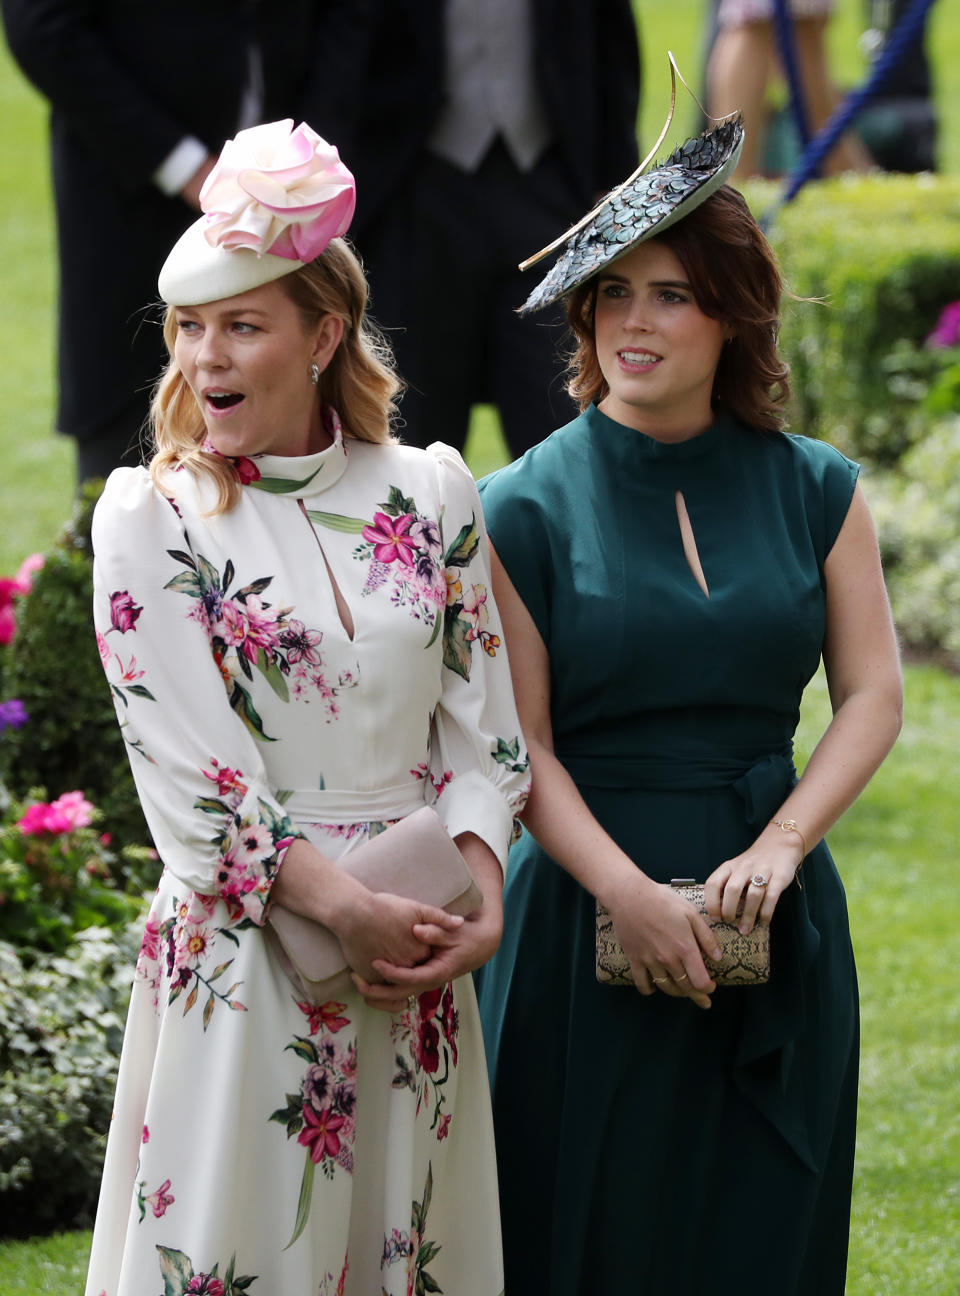 Autumn Philips (left) and Princess Eugenie of York during day three of Royal Ascot at Ascot Racecourse.